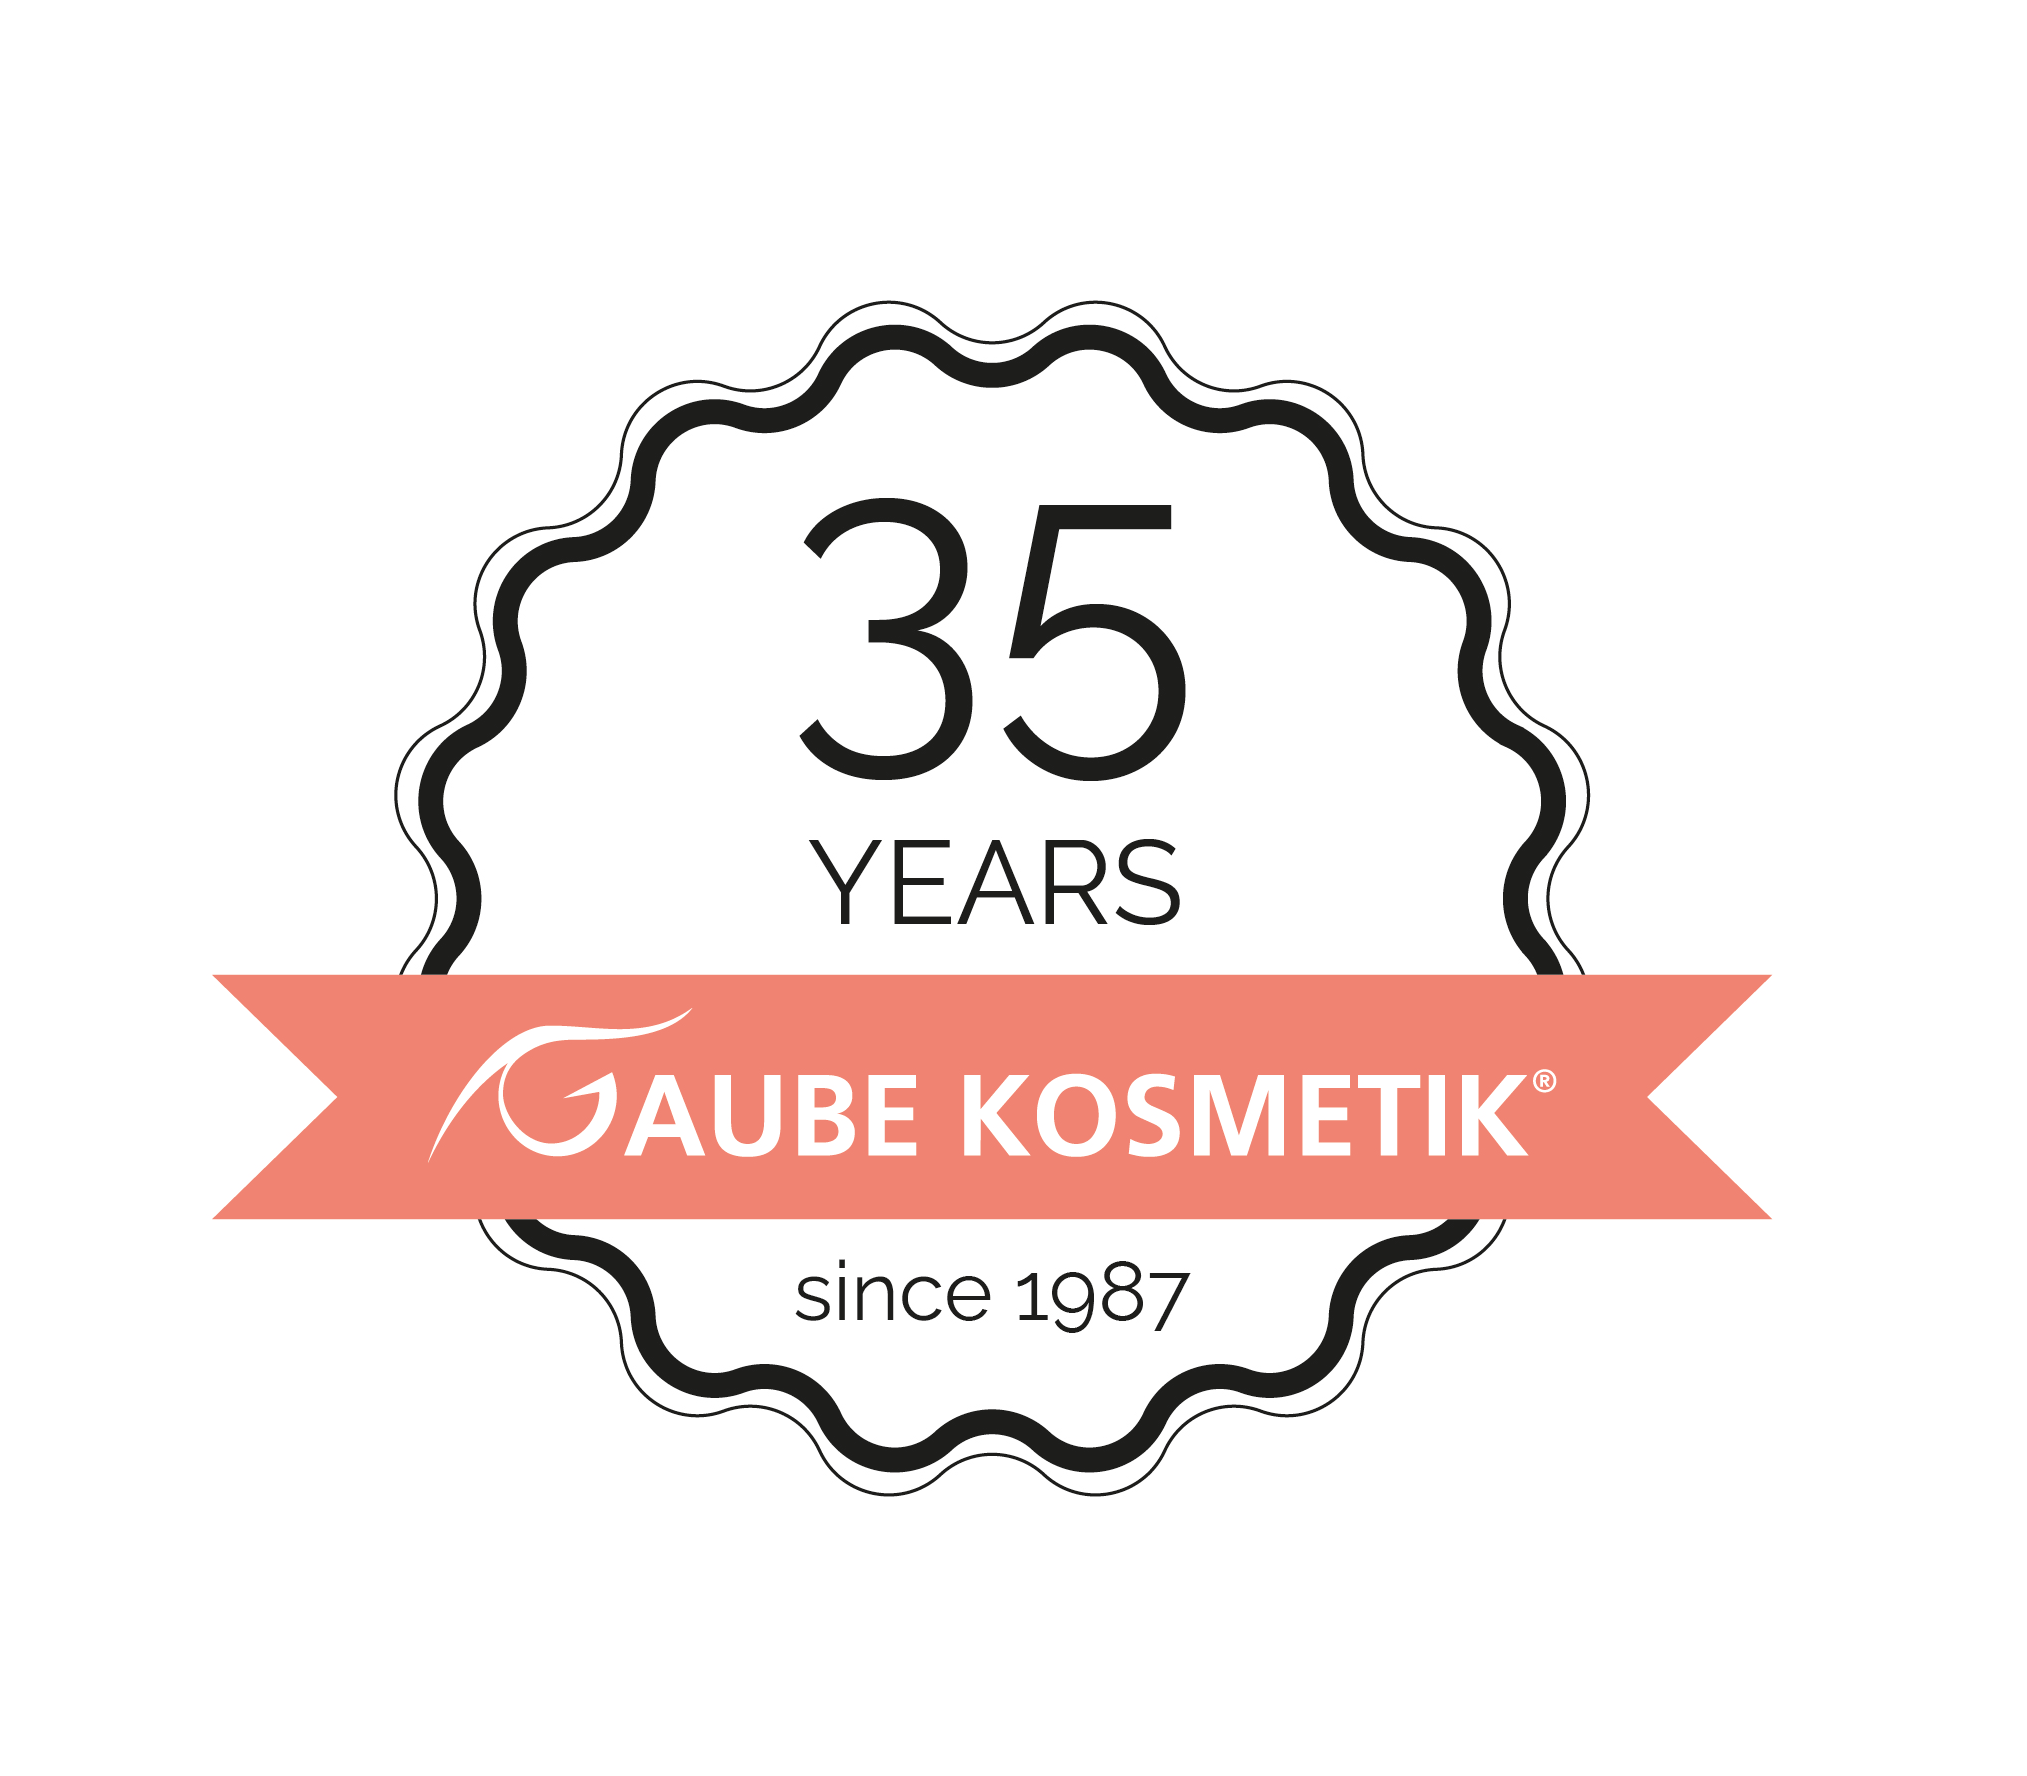 34 years of expertise in the permanent cosmetics industry